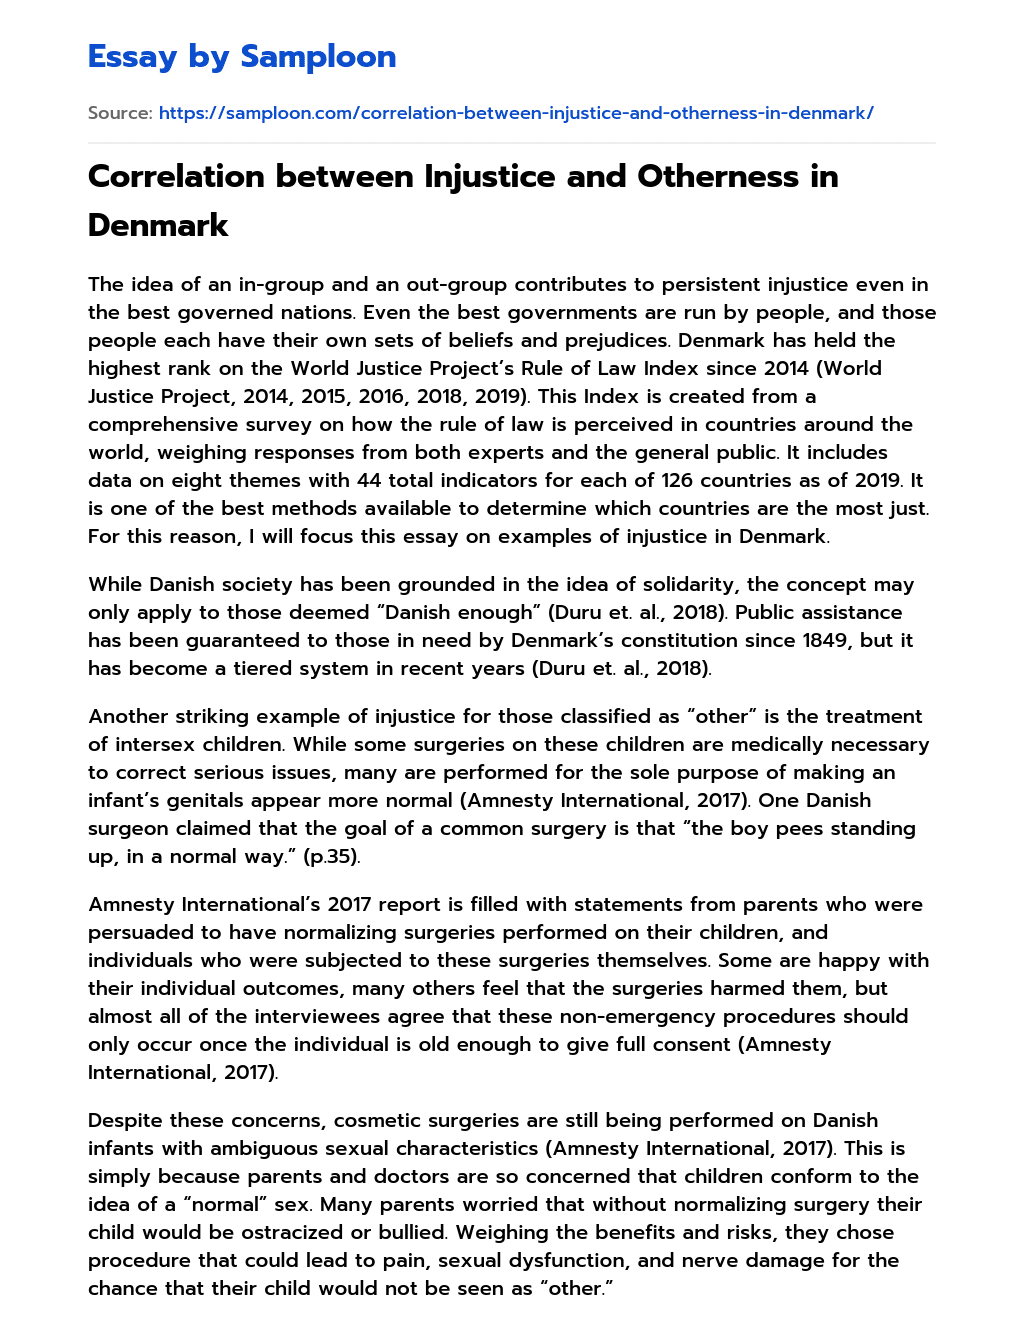 Correlation between Injustice and Otherness in Denmark essay